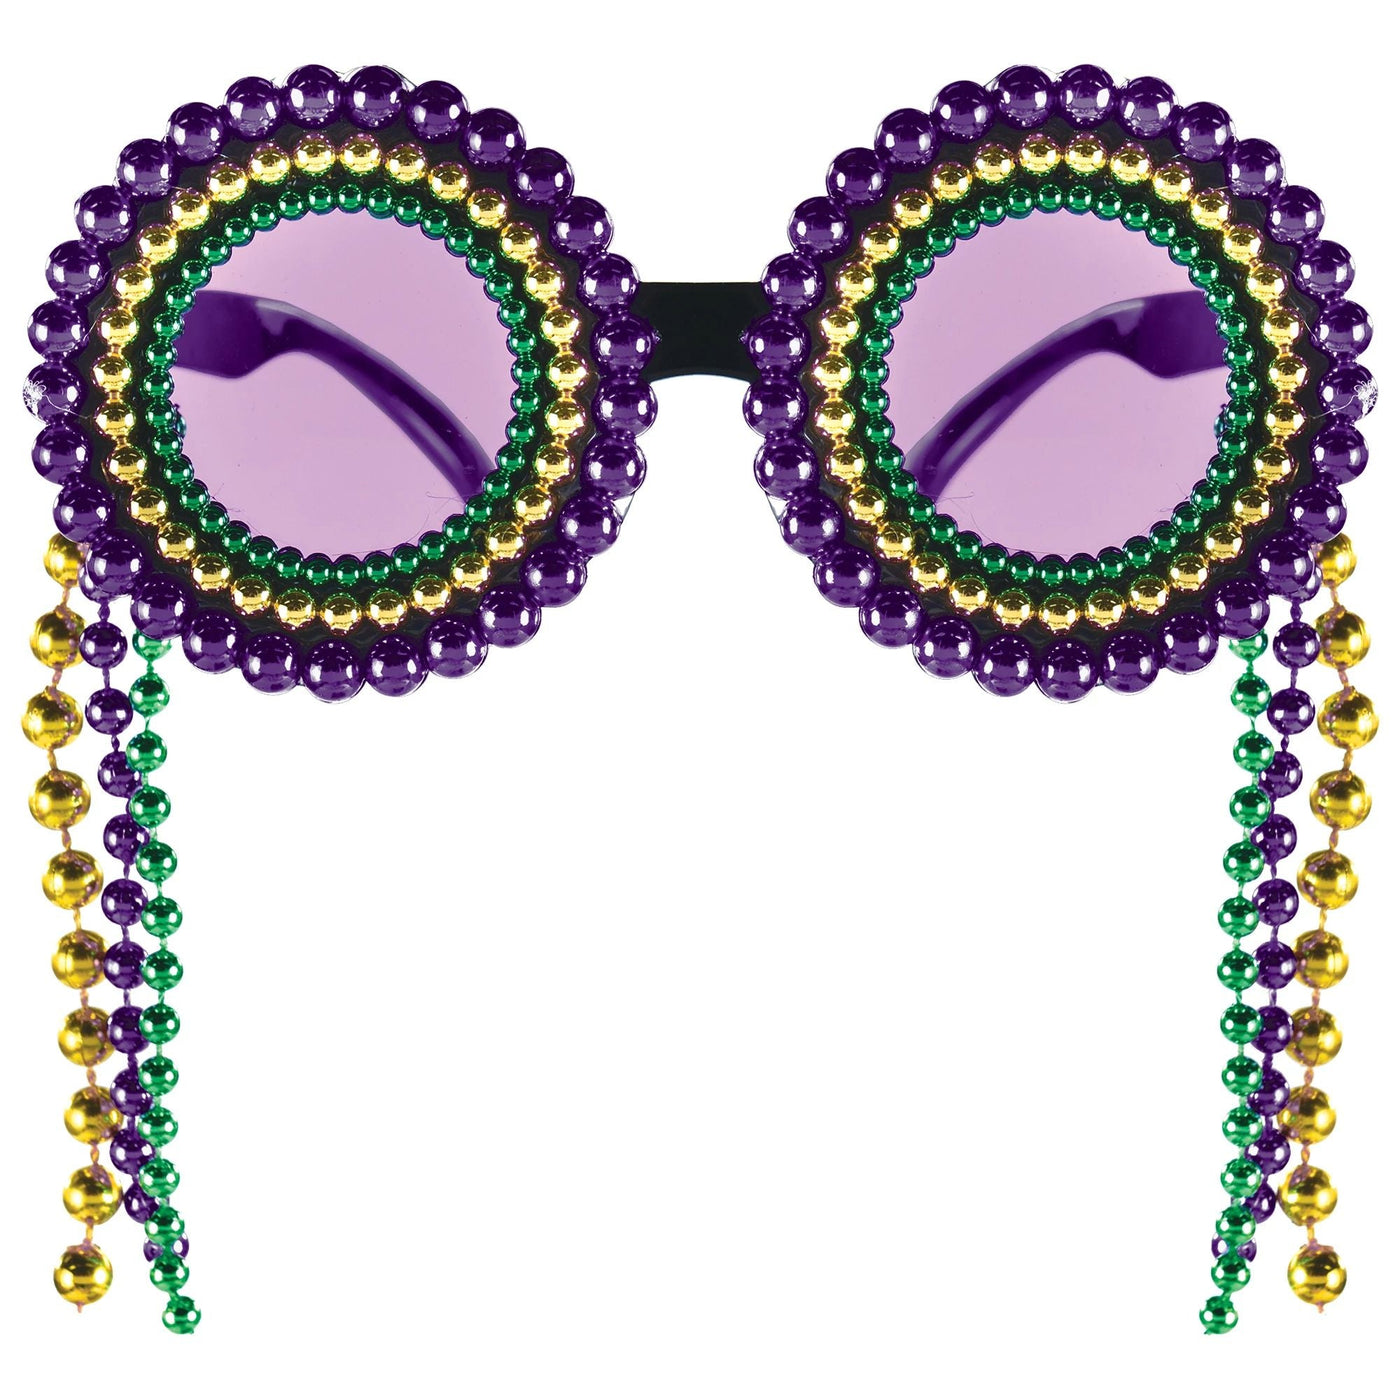 Mardi Gras Fun Shades� UV 400 - JJ's Party House - Custom Frosted Cups and Napkins